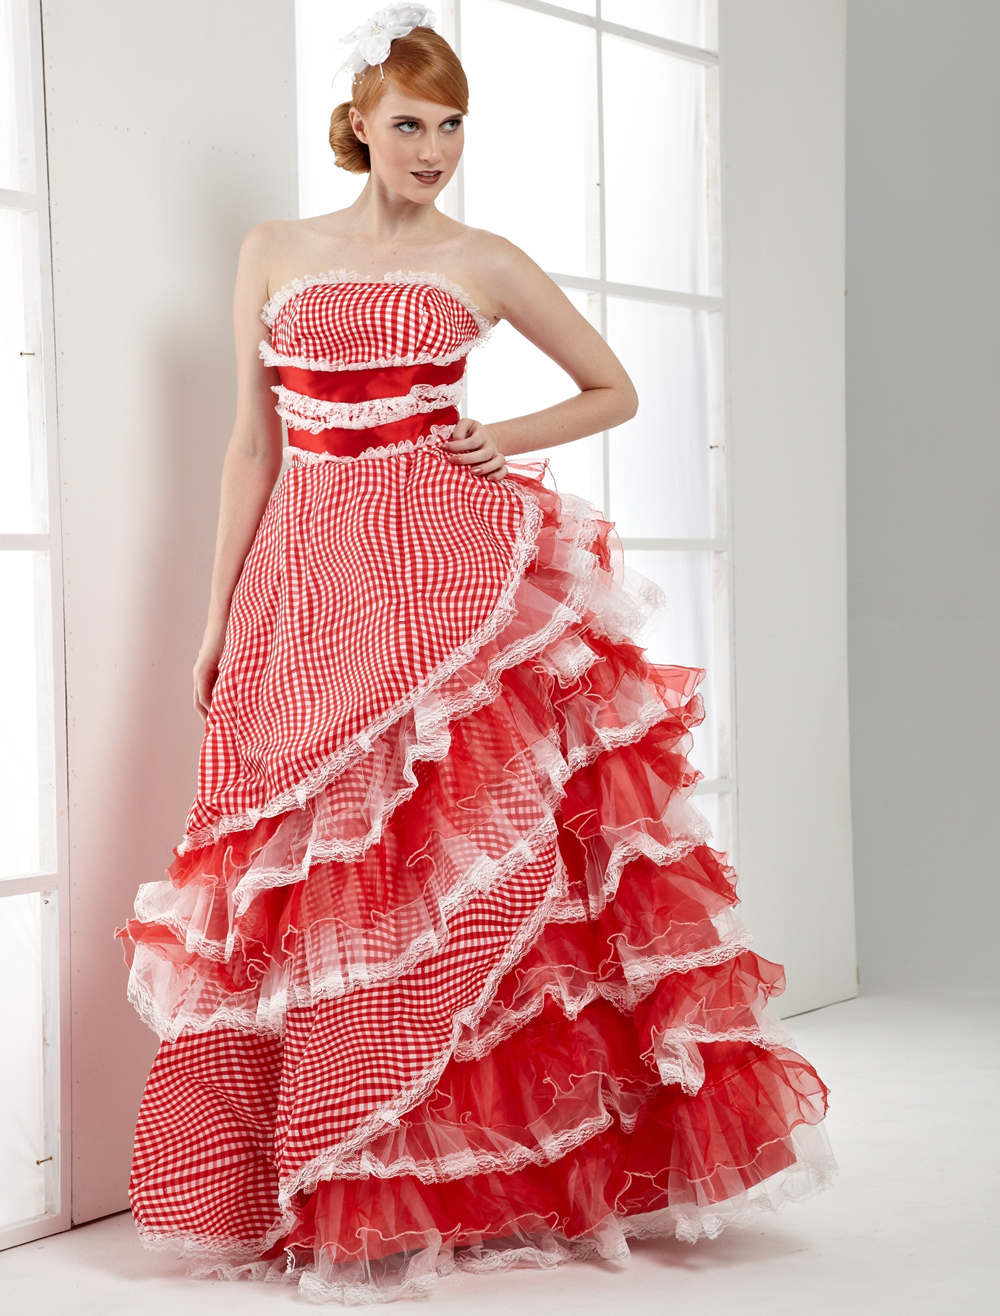 Ball Gown Red Strapless Quinceanera Dress (Wedding Quinceanera Dresses) photo